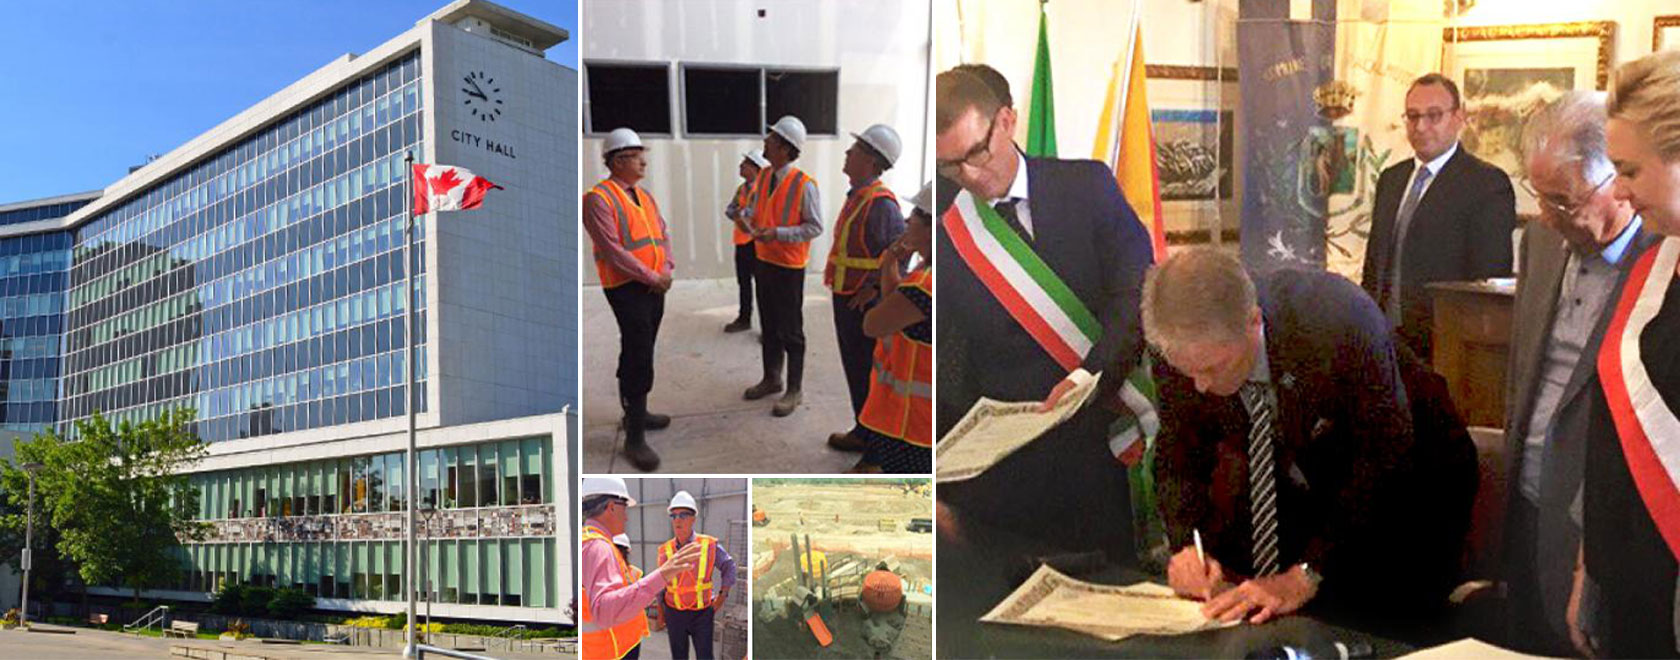 Collage of City Hall, visiting inspectors on a construction site, Mayor signing certificates